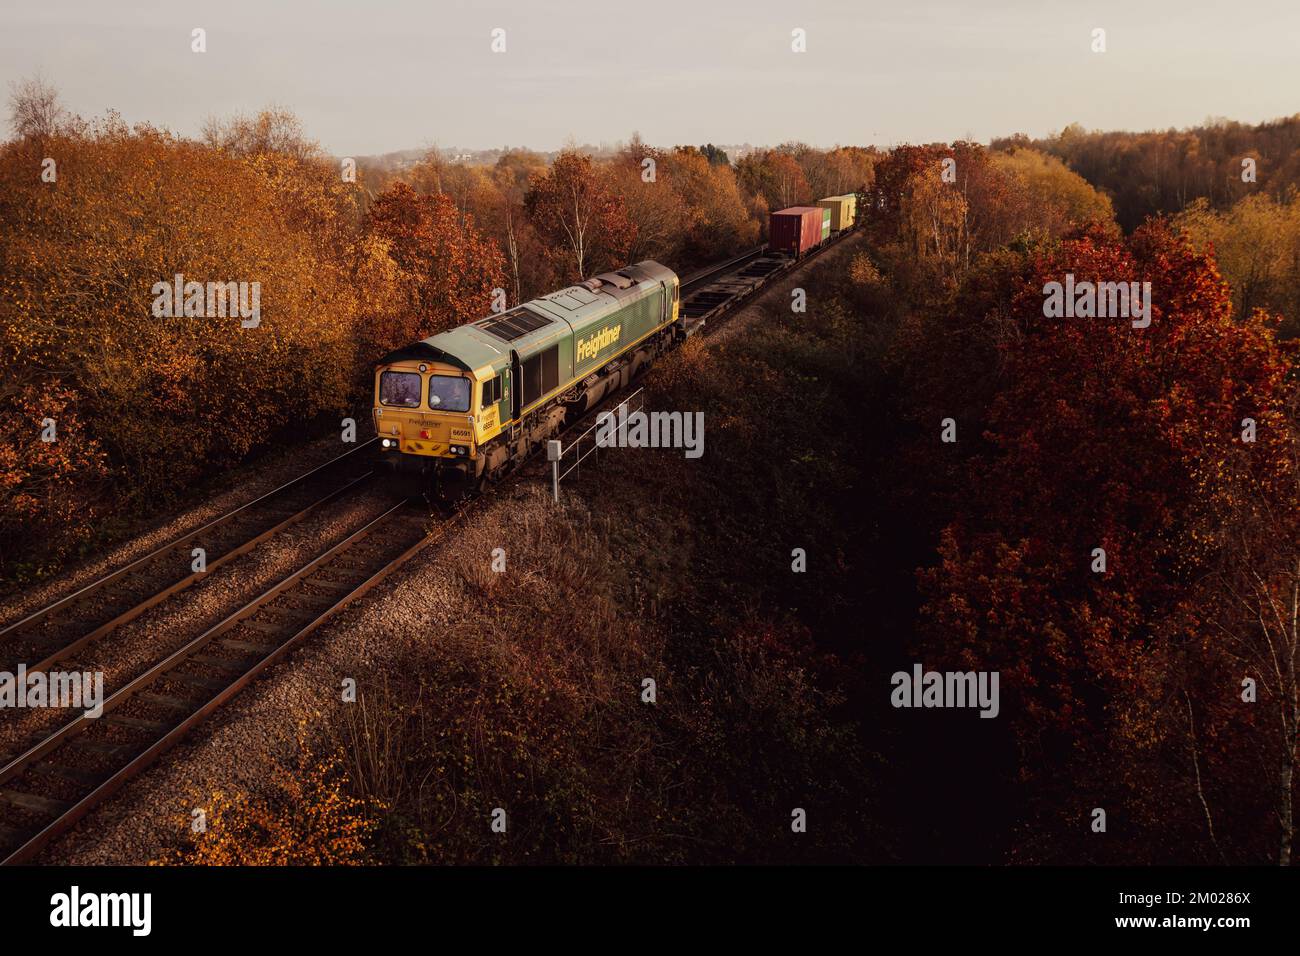 WAKEFIELD, UK - DECEMBER 2, 2022.  A UK Freightliner Intermodal Class 66 Locomotive freight train hauling shipping containers through Autumnal woodlan Stock Photo